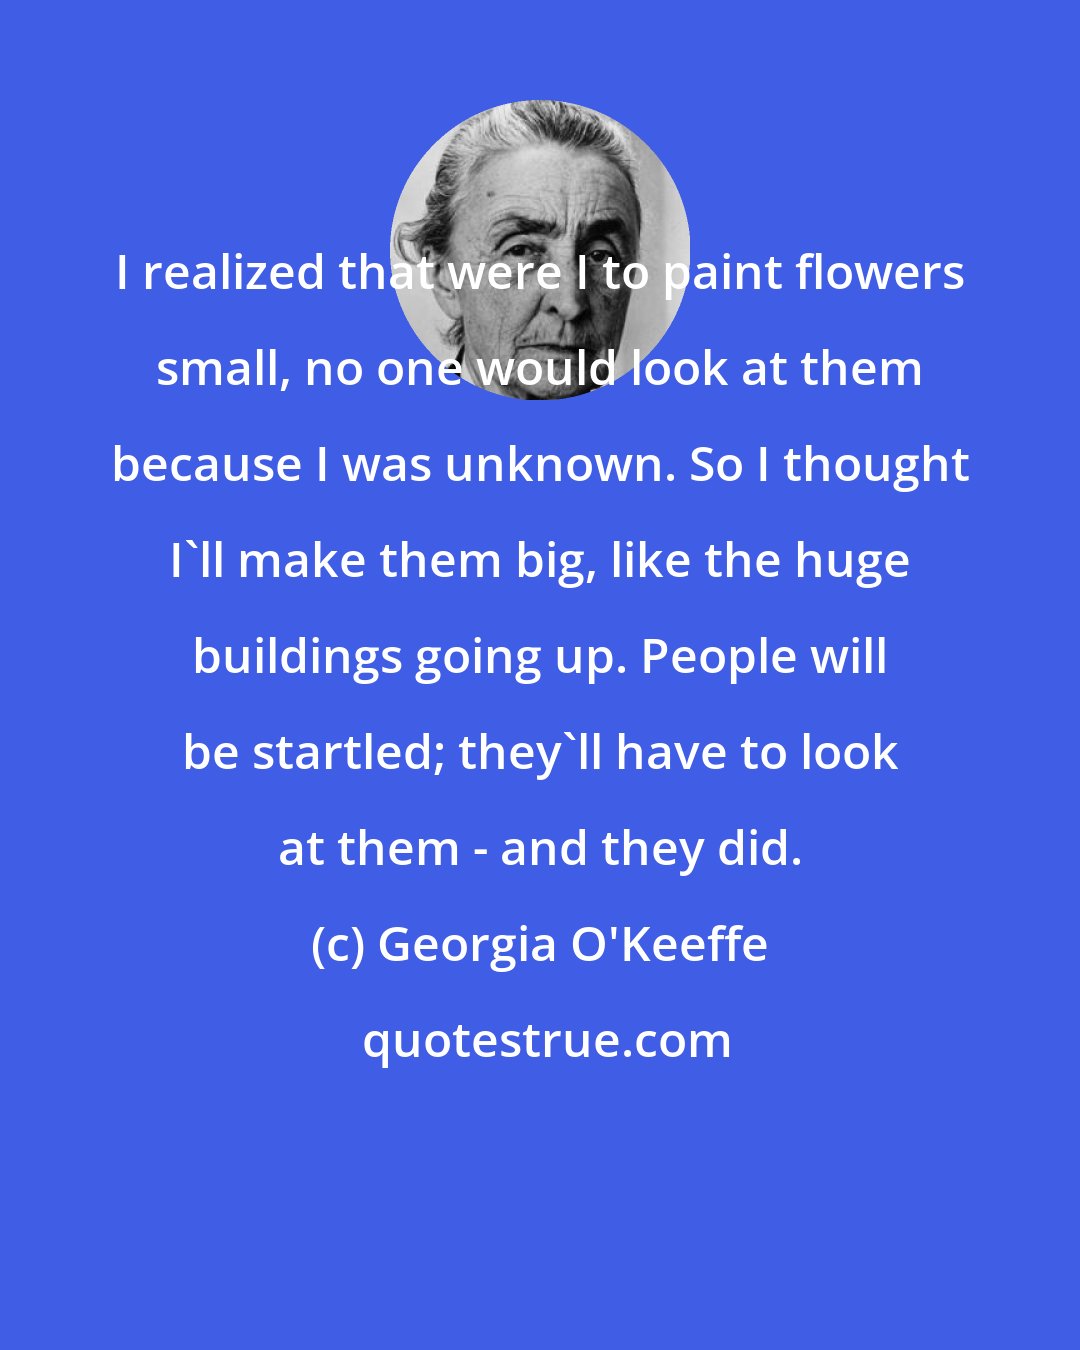 Georgia O'Keeffe: I realized that were I to paint flowers small, no one would look at them because I was unknown. So I thought I'll make them big, like the huge buildings going up. People will be startled; they'll have to look at them - and they did.